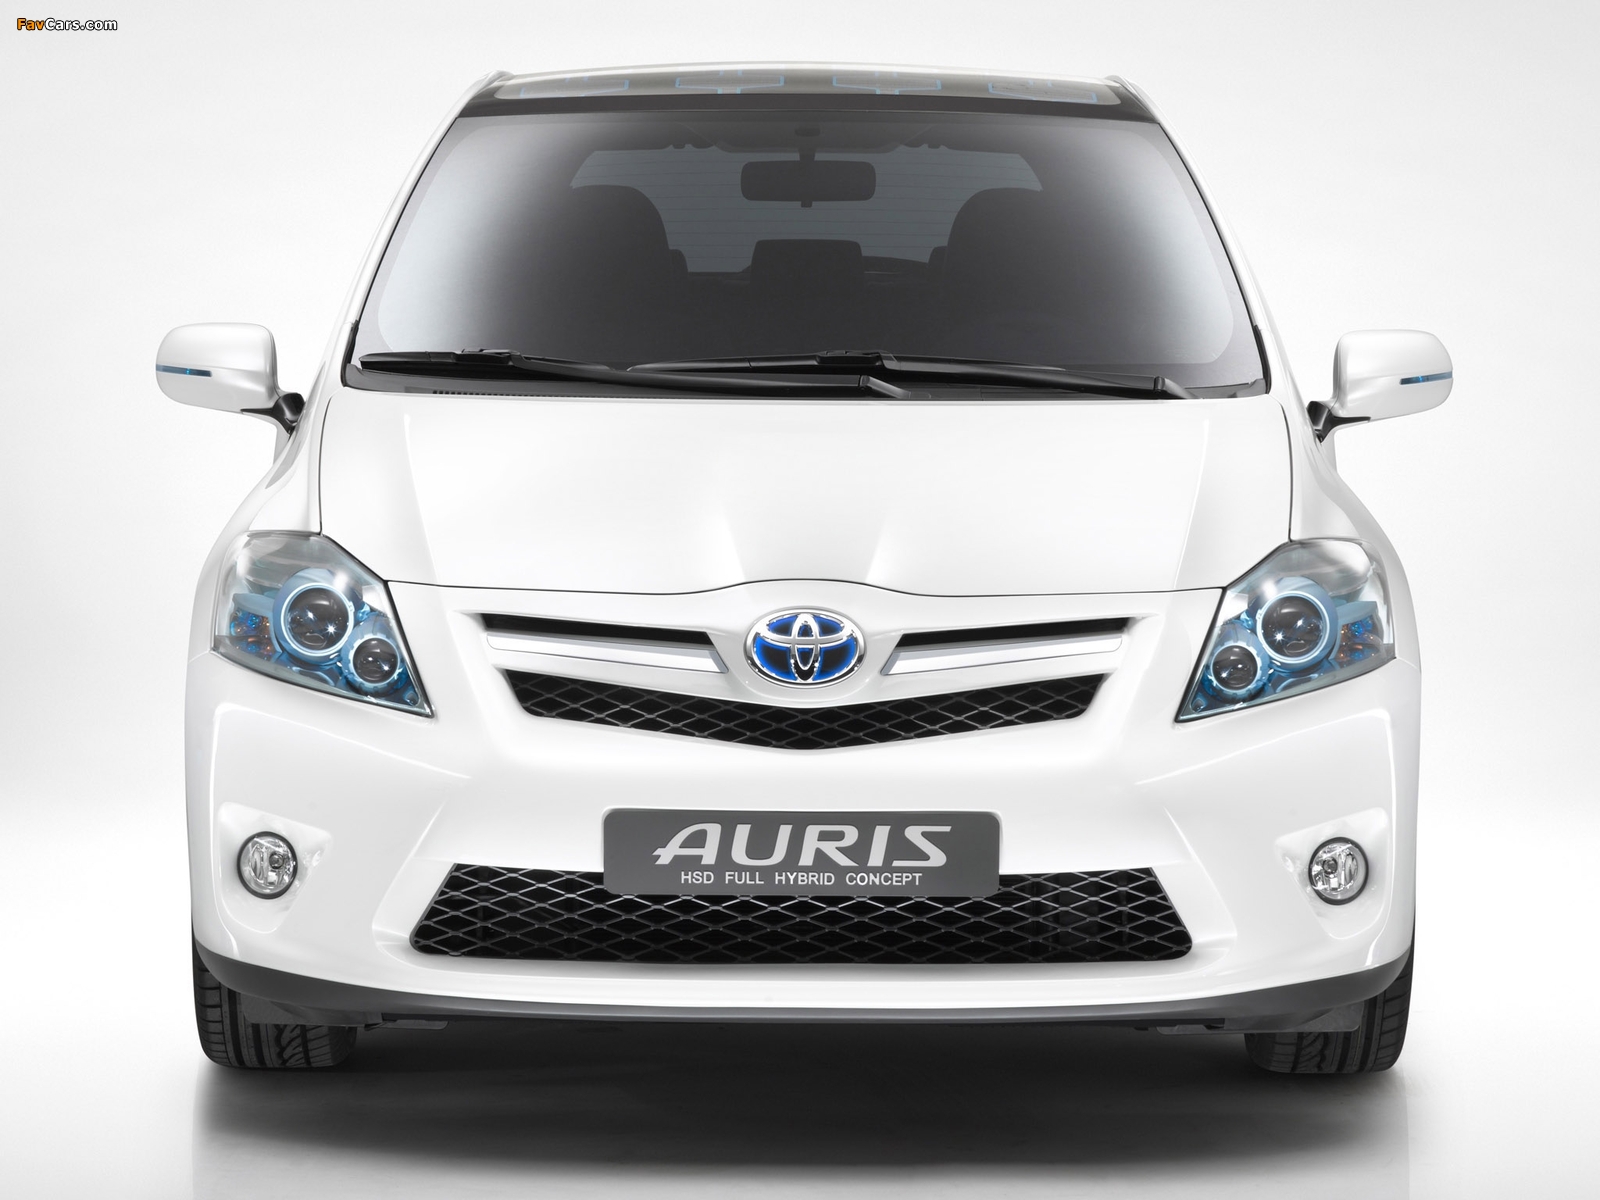 Toyota Auris HSD Full Hybrid Concept 2009 pictures (1600 x 1200)